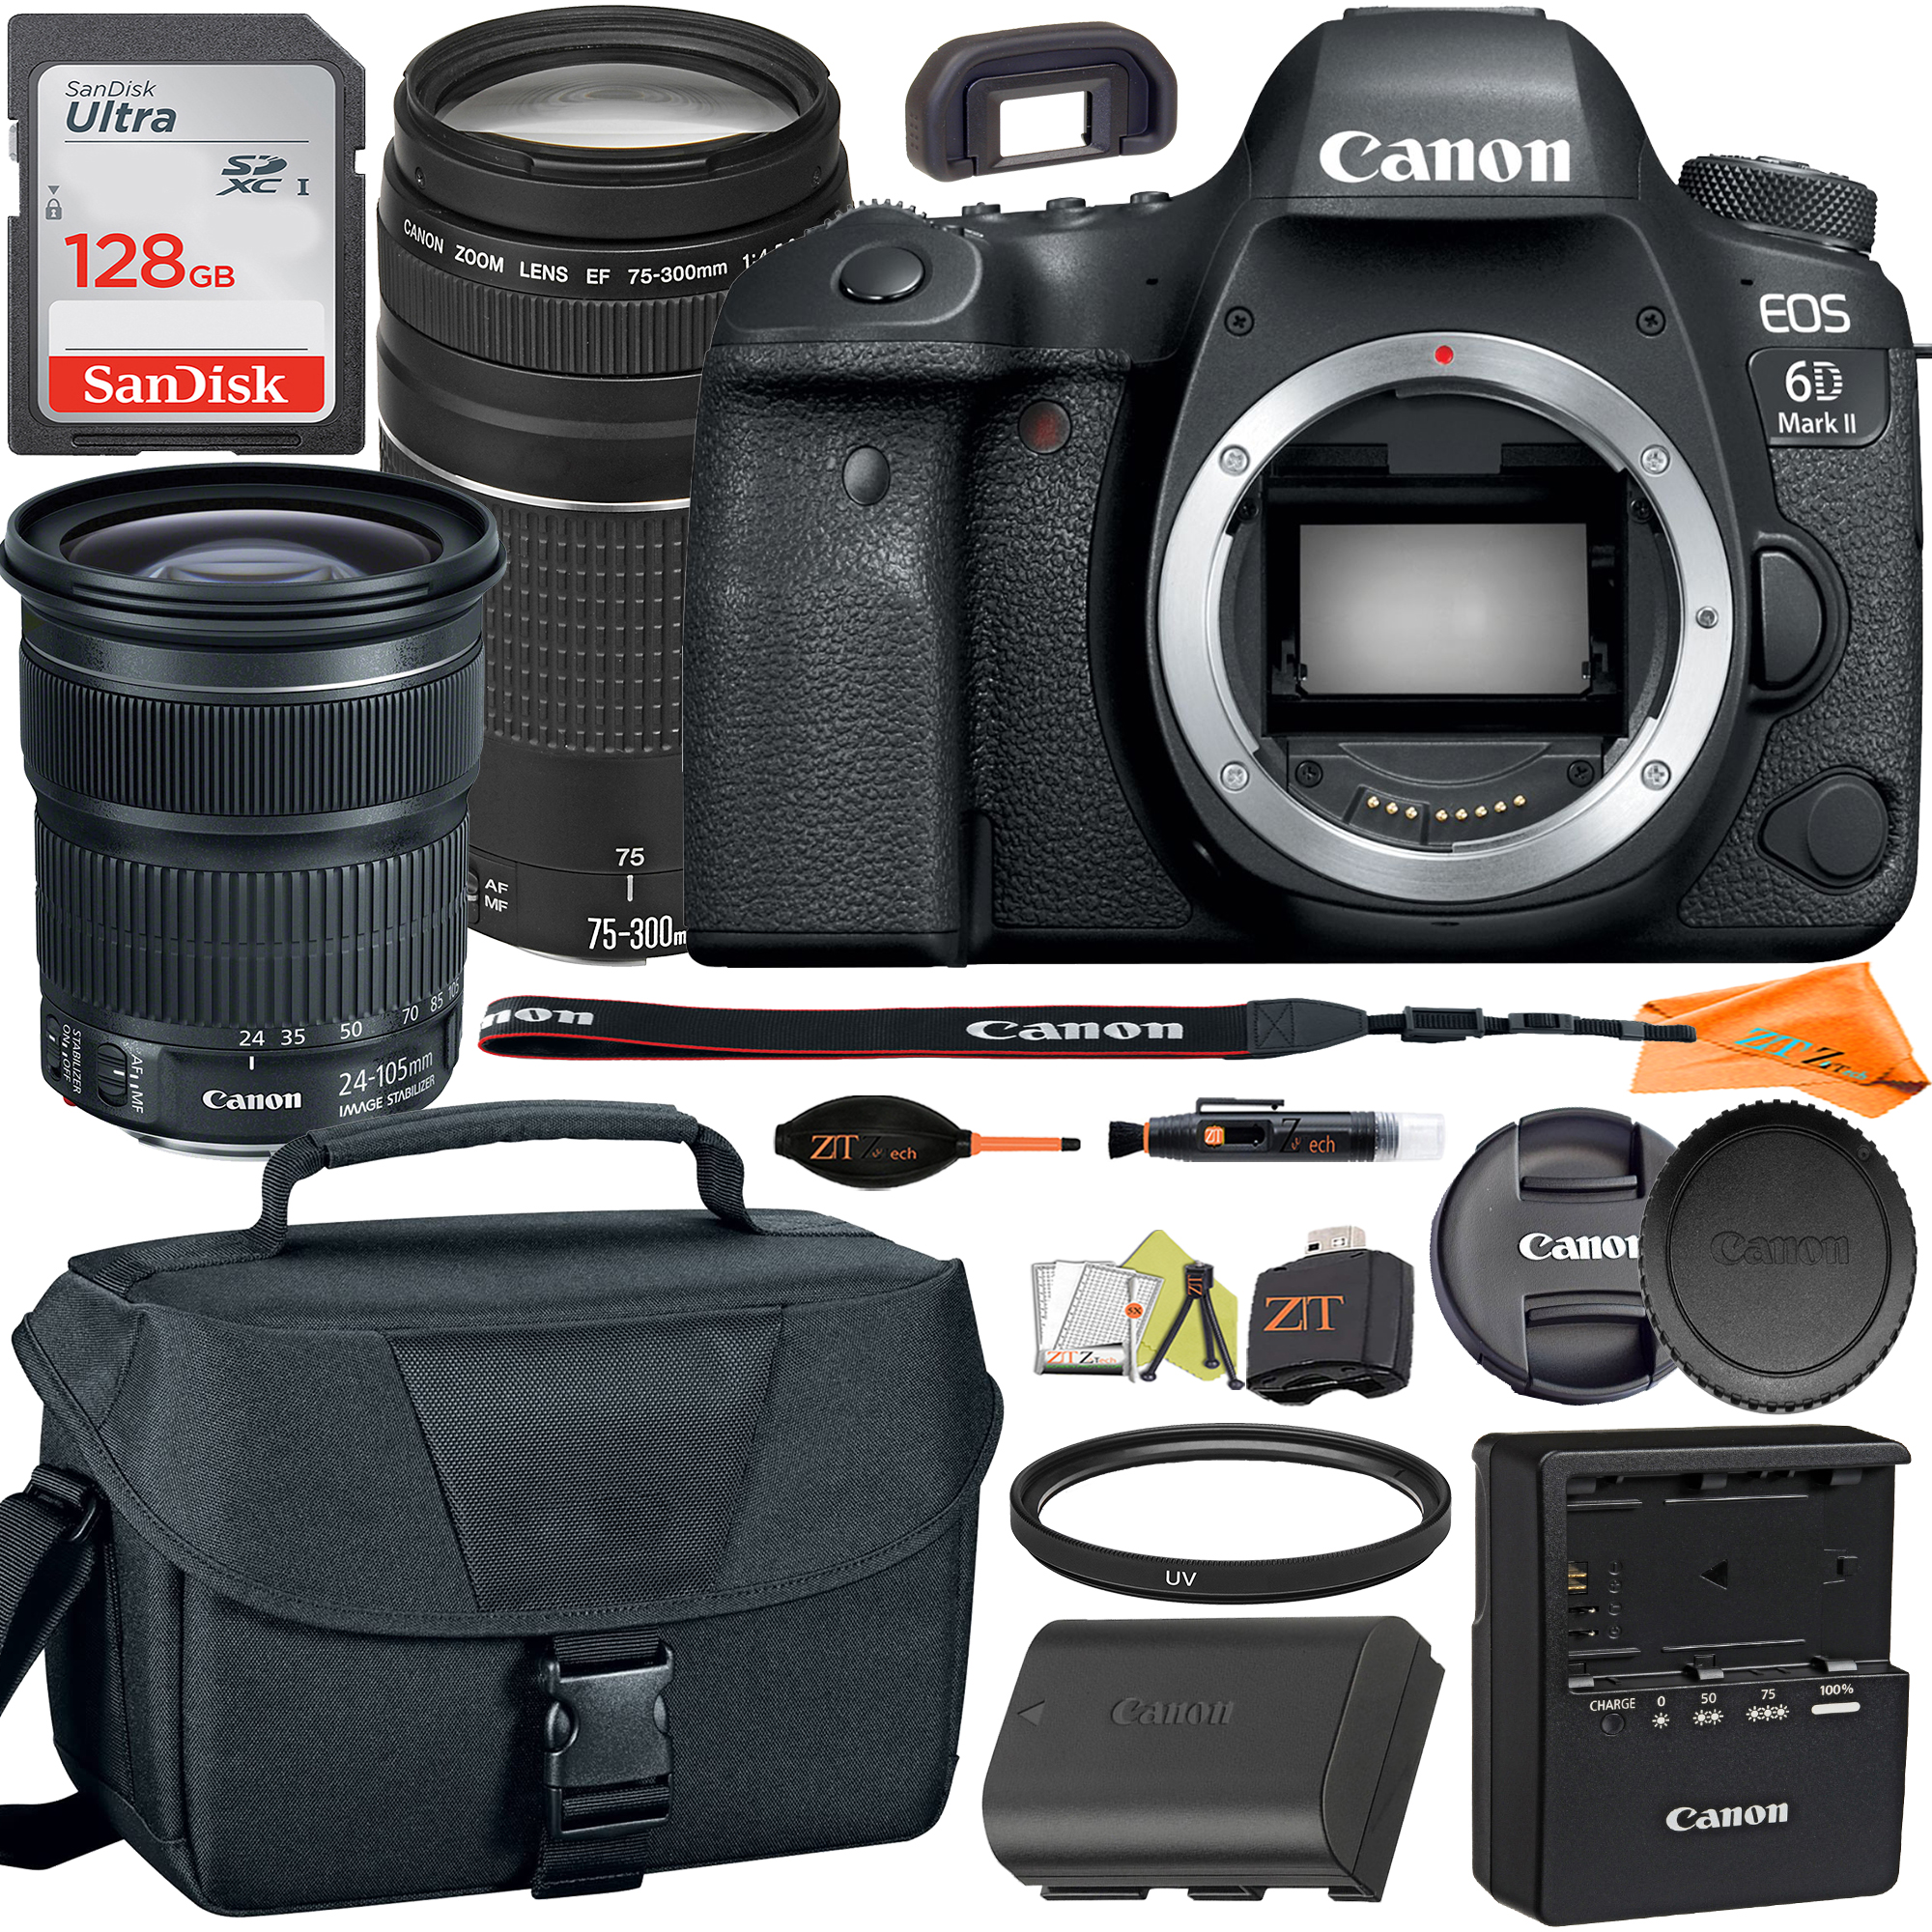 Canon EOS 6D Mark II DSLR Camera with 24-105mm + 75-300mm Lens with SanDisk 128GB Card + Case + ZeeTech Accessory Bundle